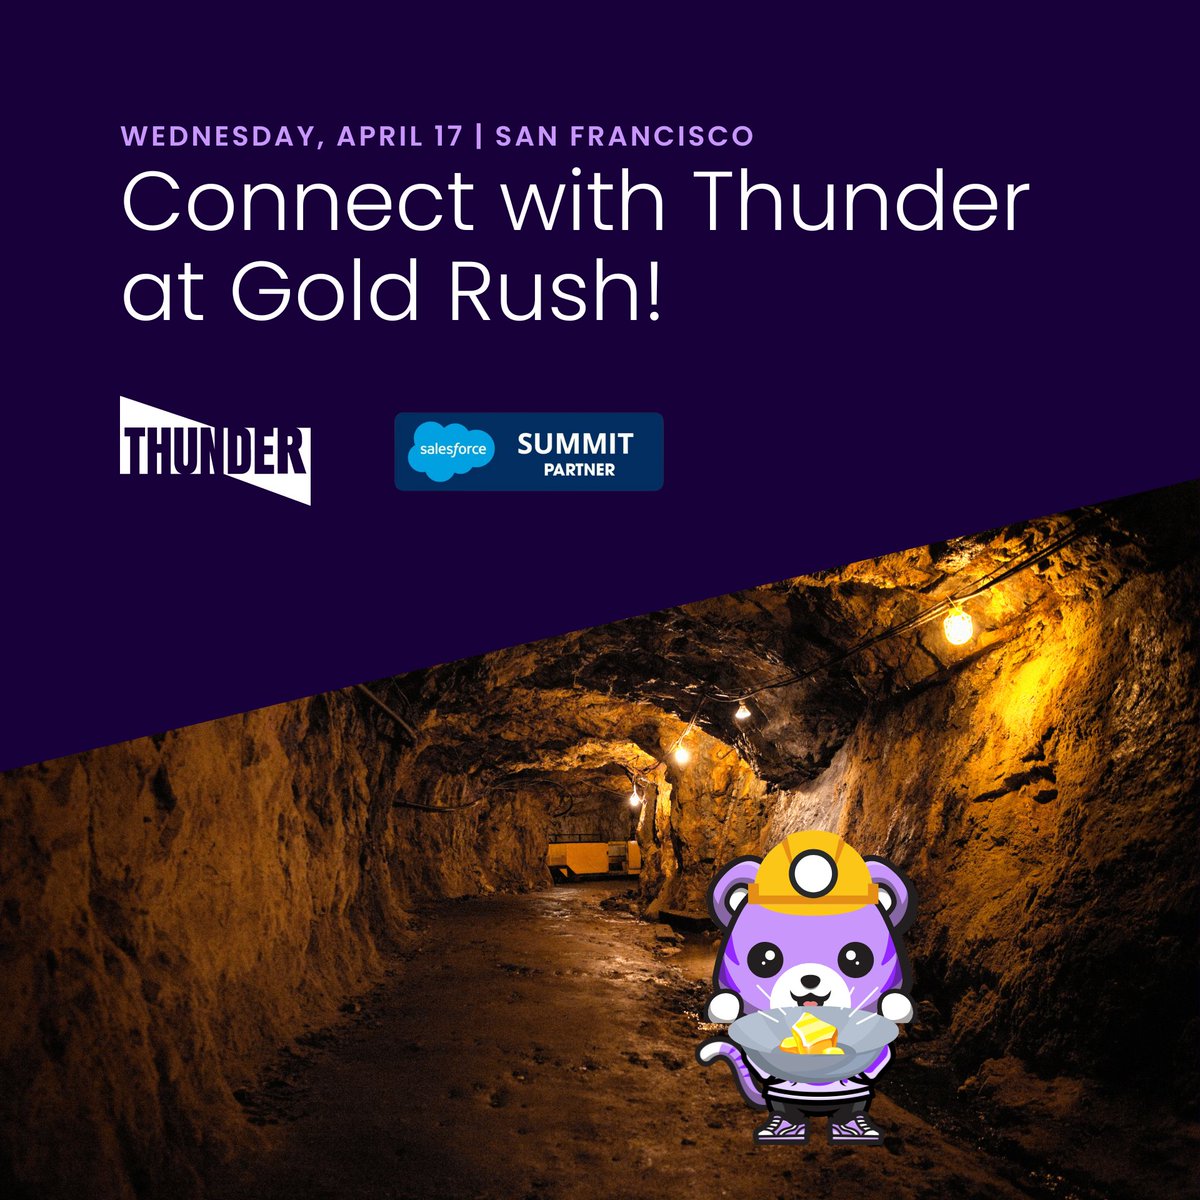 Meet the @ThunderSF1 team at @Salesforce Gold Rush 4/18 in San Francisco to learn how we can help you 'strike' it rich with Service Cloud! #SalesforcePartner #ServiceCloud #GoldRush #ThunderKnowsServiceCloud #StrikerStrikingItRich

Set up a meeting: ow.ly/7ciw50R8HWU